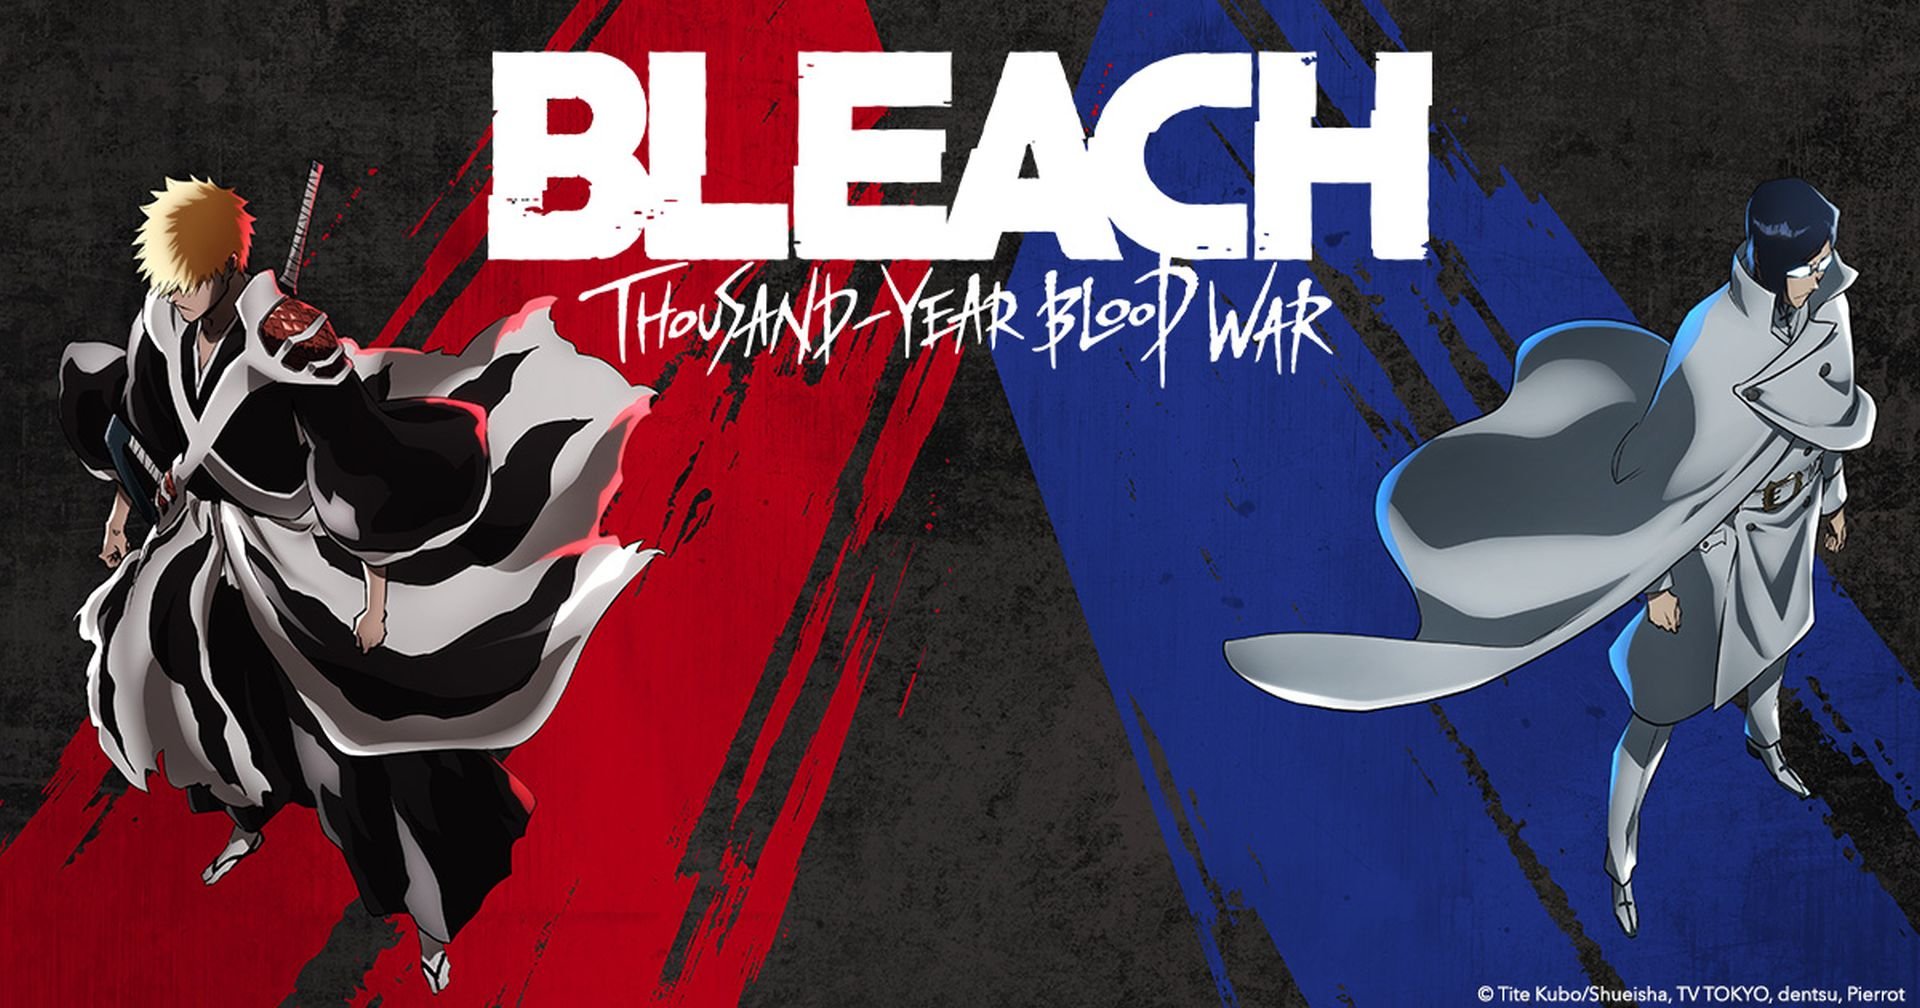 Bleach: Thousand-Year Blood War Anime Unveils New Visual for Part